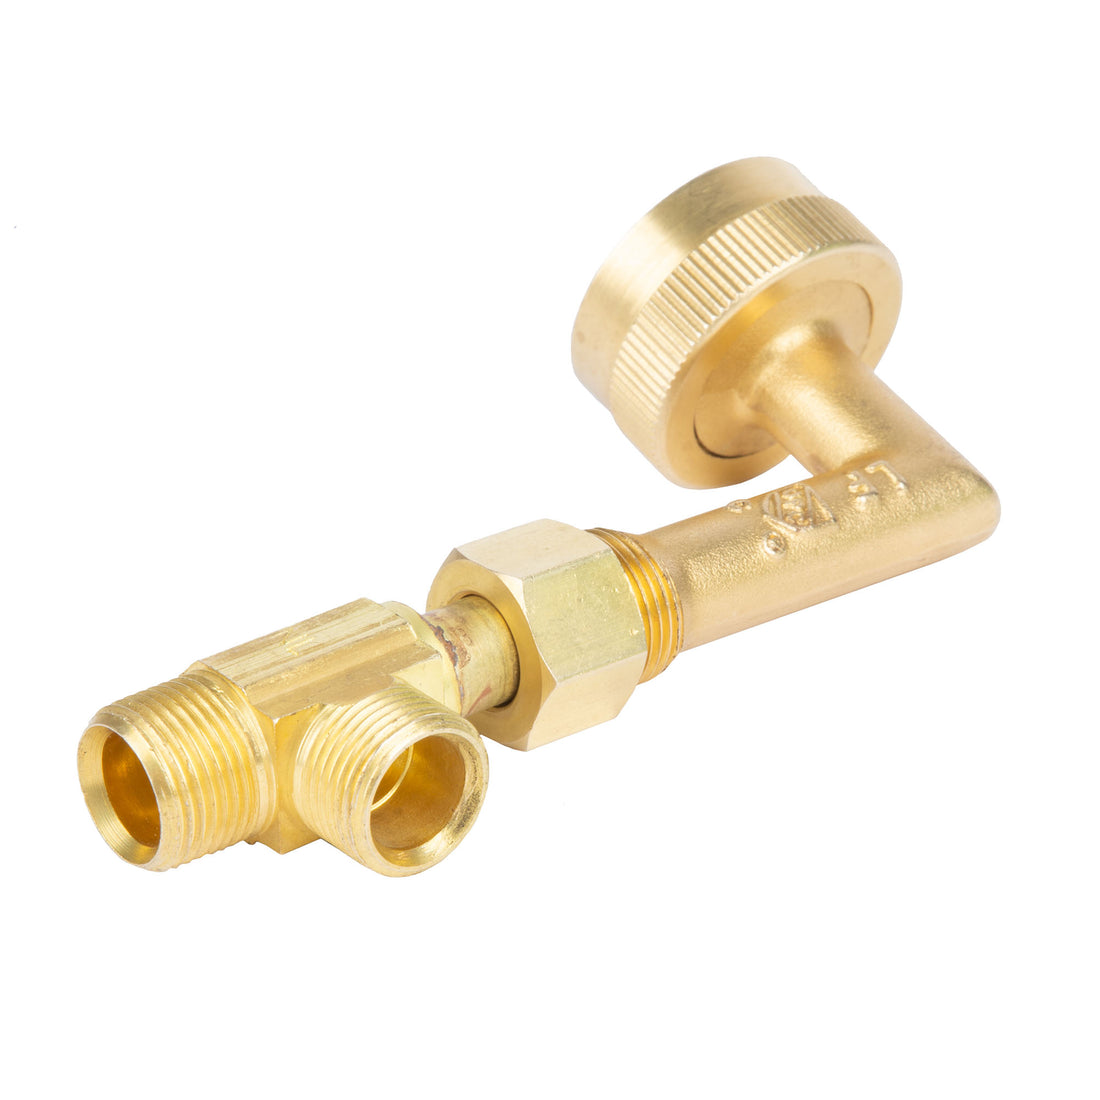 ¾ in. Garden Hose Connector Attachment for Utility Sinks